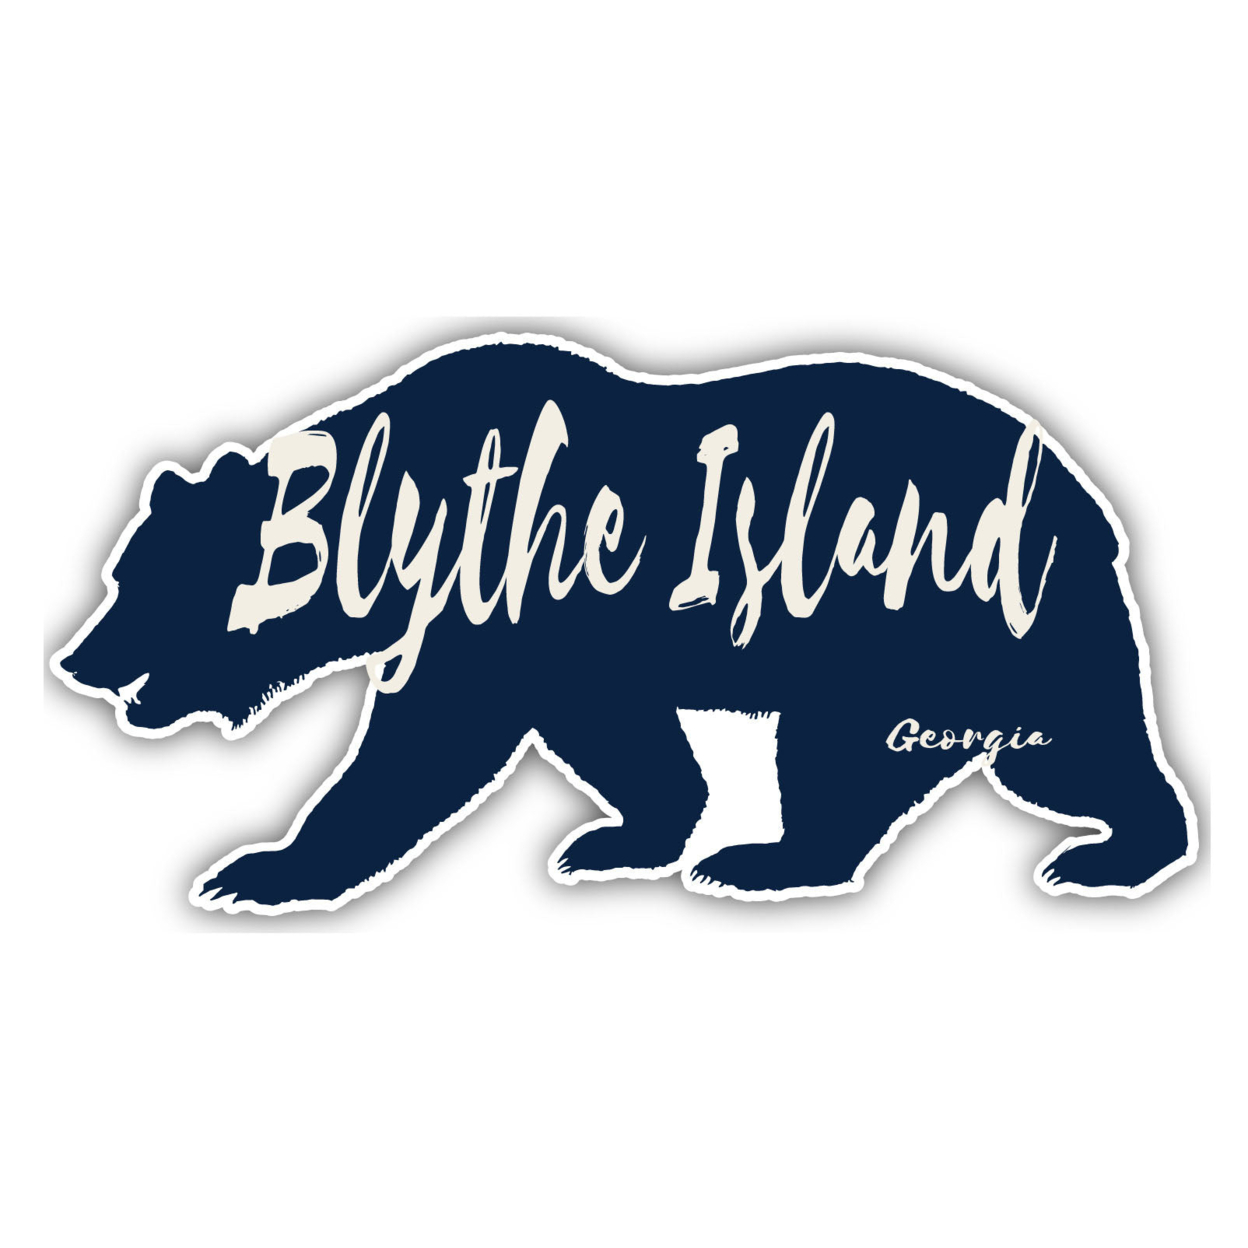 Blythe Island Georgia Souvenir Decorative Stickers (Choose Theme And Size) - 4-Pack, 8-Inch, Tent